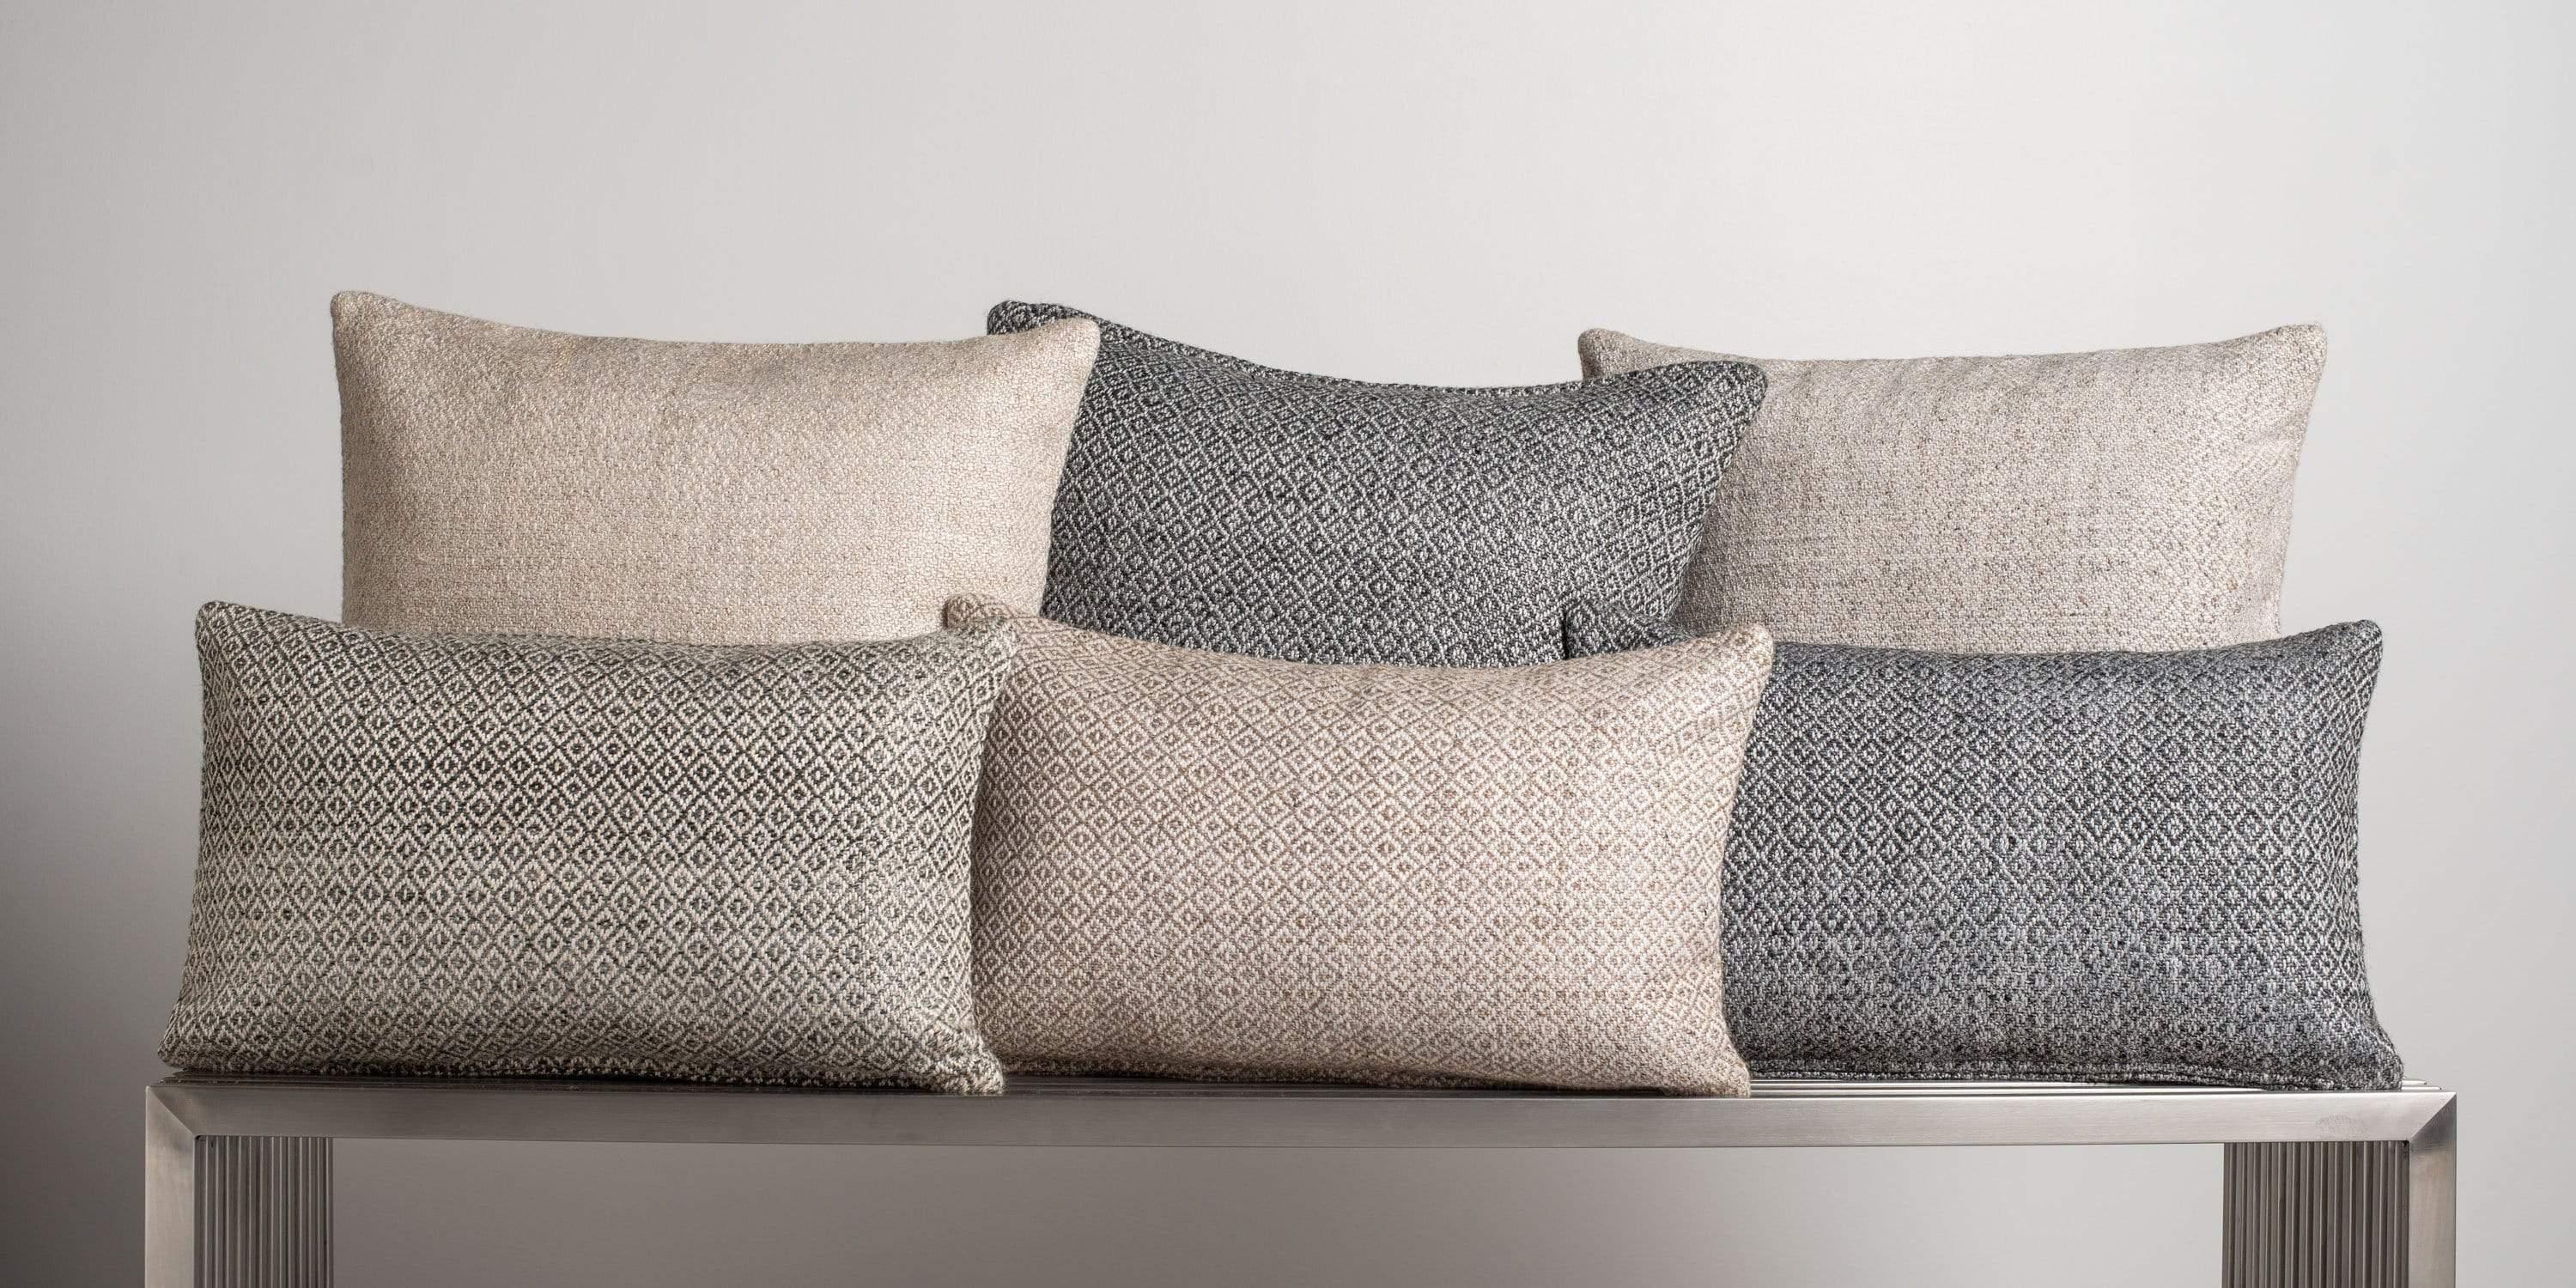 Rich in texture, woven with a subtly graphic pattern, our double-diamond pillow adds interest to your pillowscape, pair with our solid cashmere and textured pillows to round out your design. Pillow insert sold separately.

Size 22